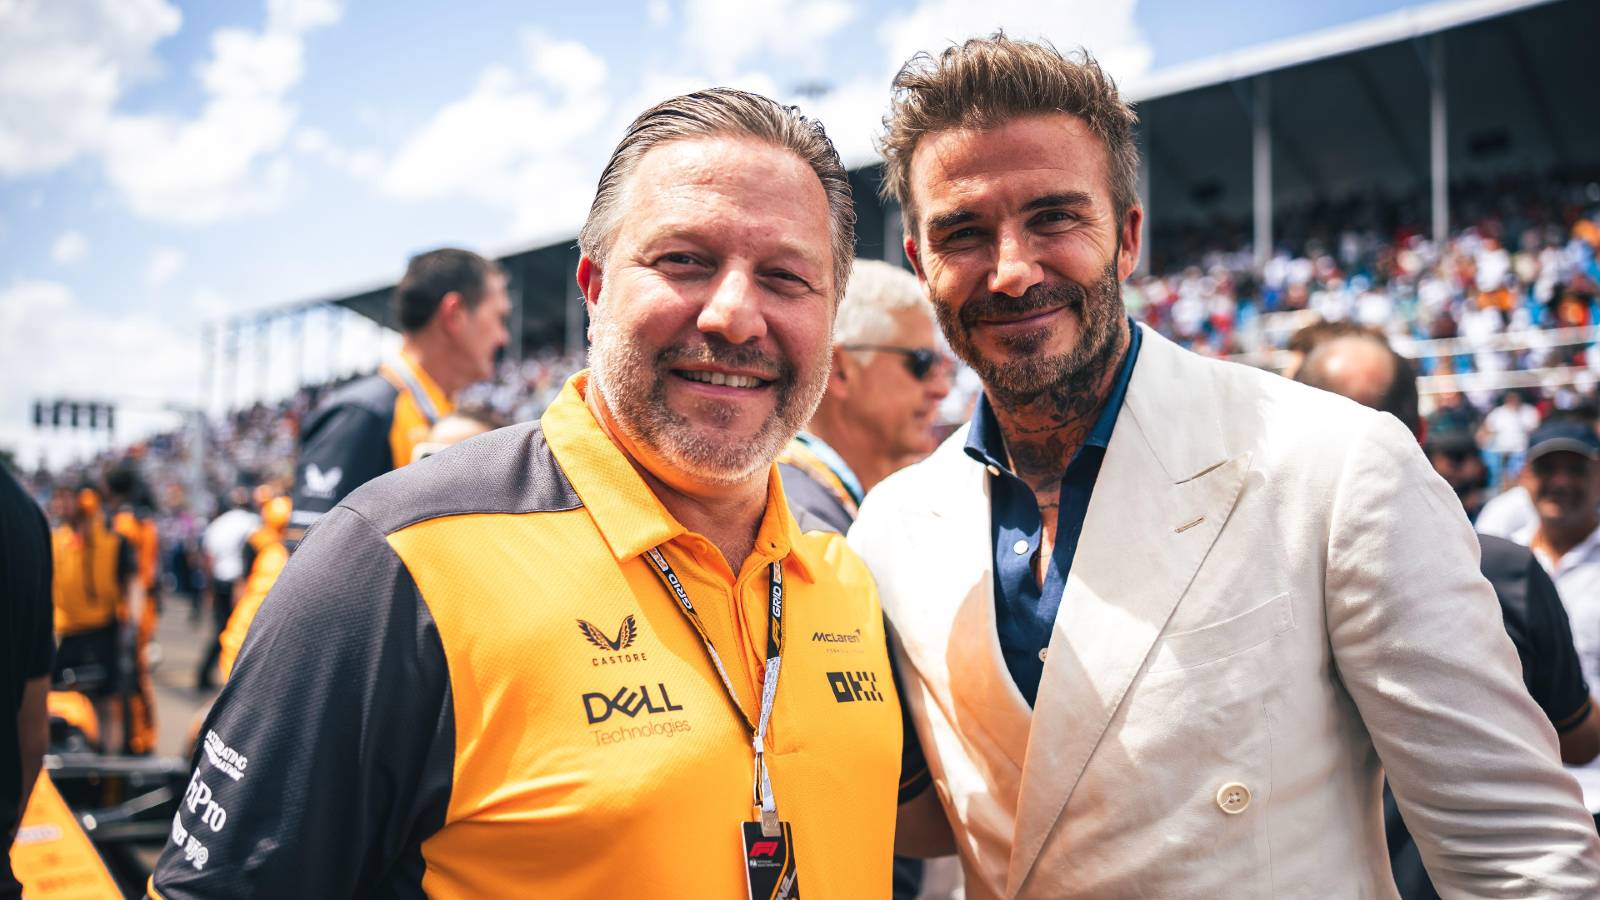 Zak Brown poses for a photo with David Beckham. Miami May 2022.